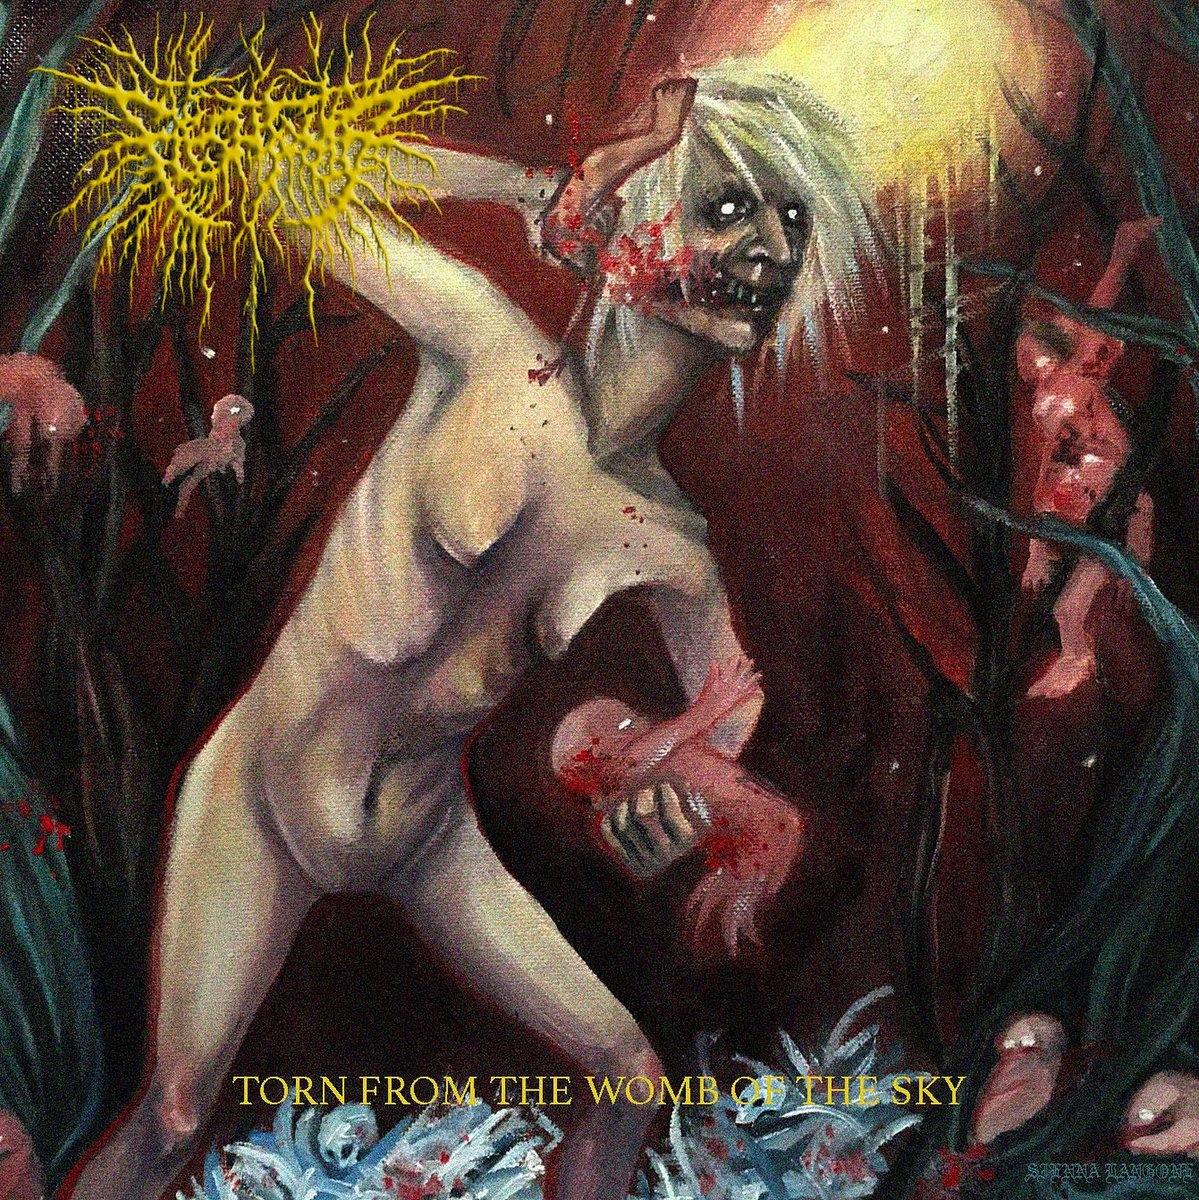 Buy – Flesh Tomb "Torn From The Womb Of The Sky" CD – Band & Music Merch – Cold Cuts Merch